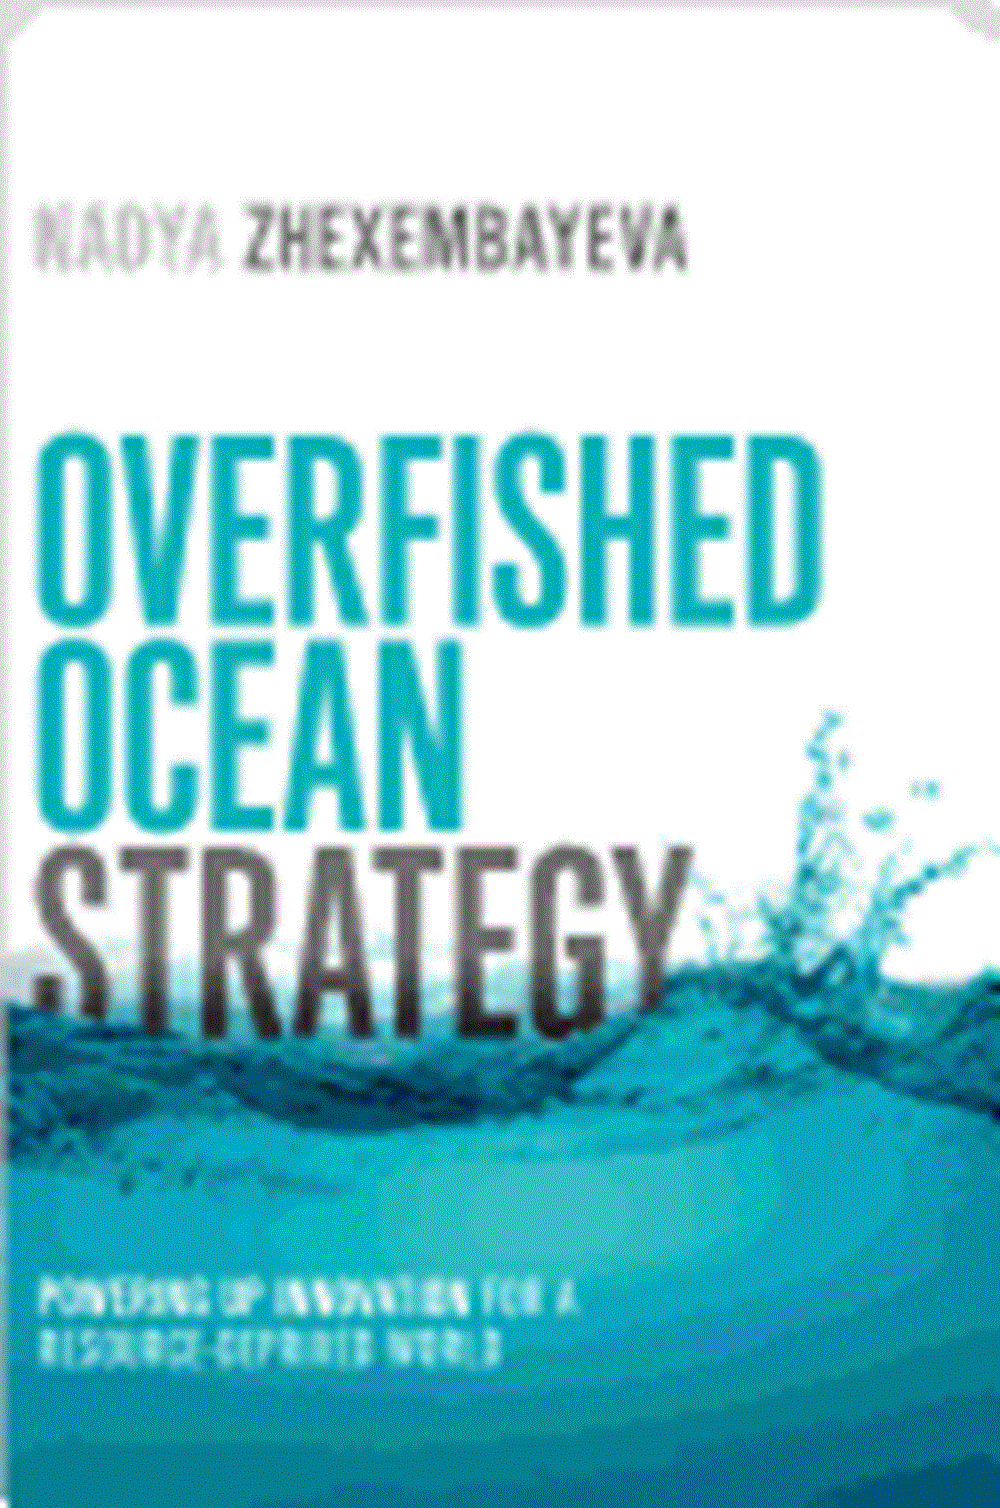 Overfished Ocean Strategy: Powering Up Innovation for a Resource-Deprived World